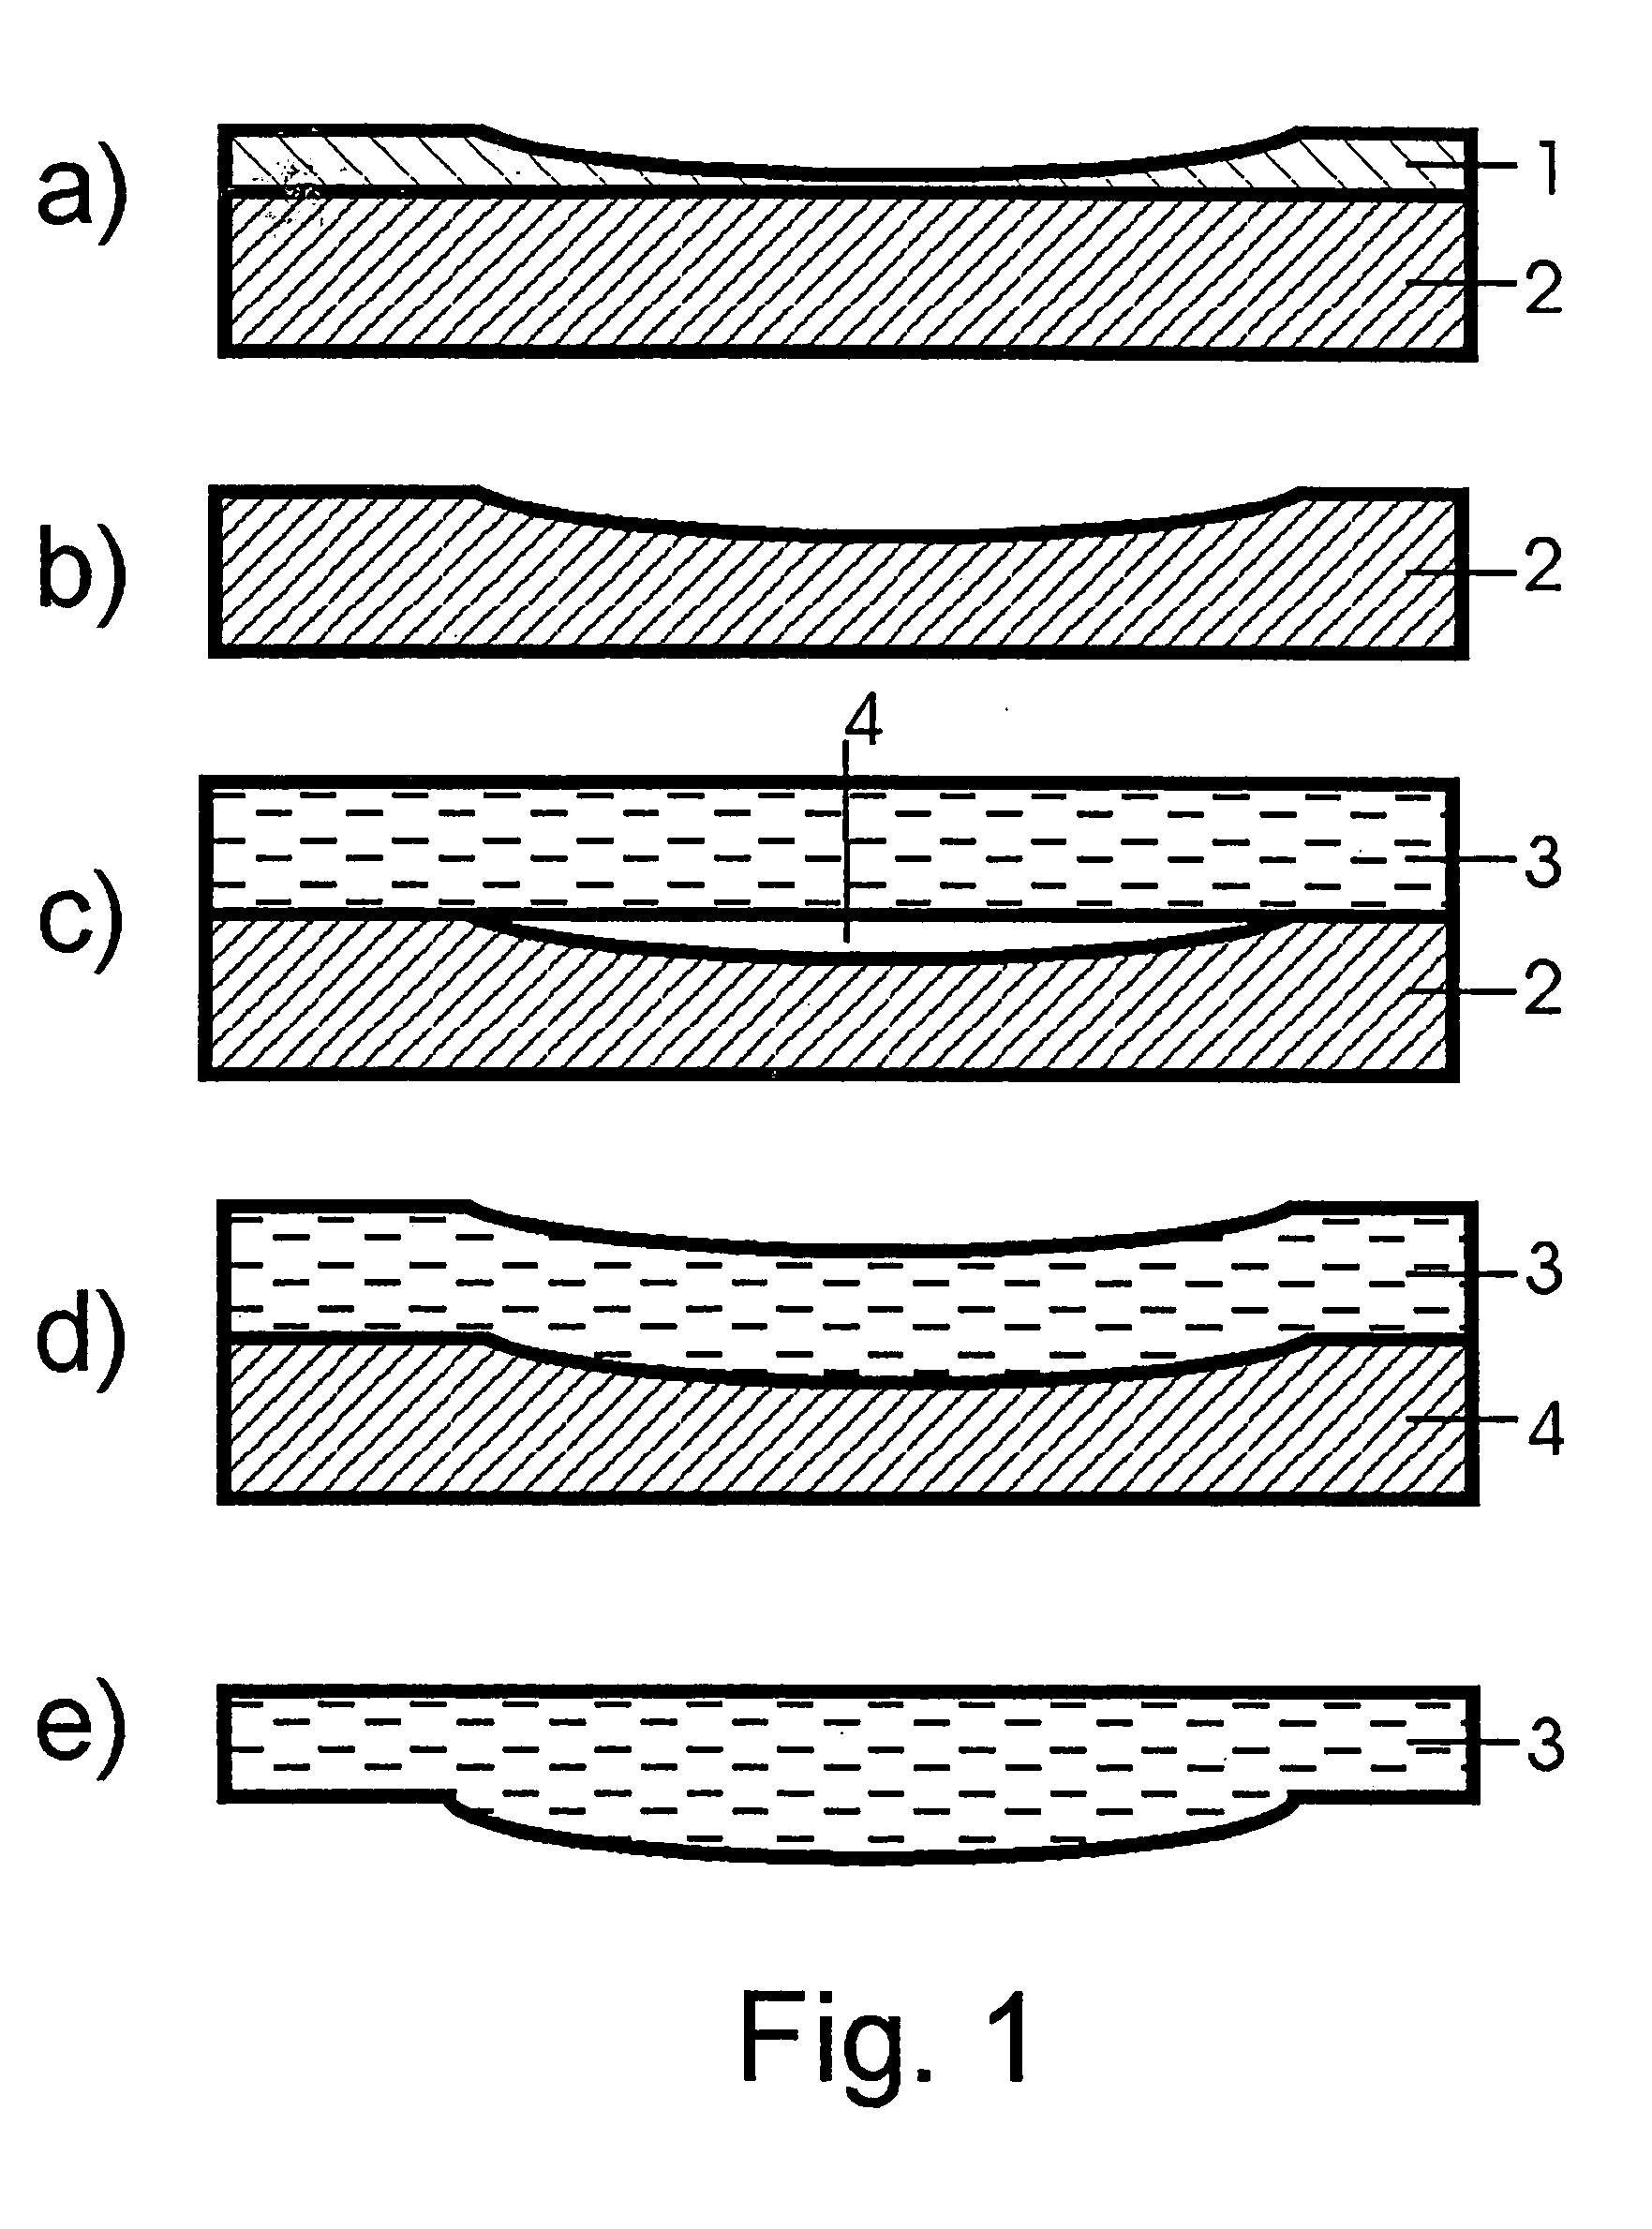 Method for producing micromechanical and micro-optic components consisting of glass-type materials